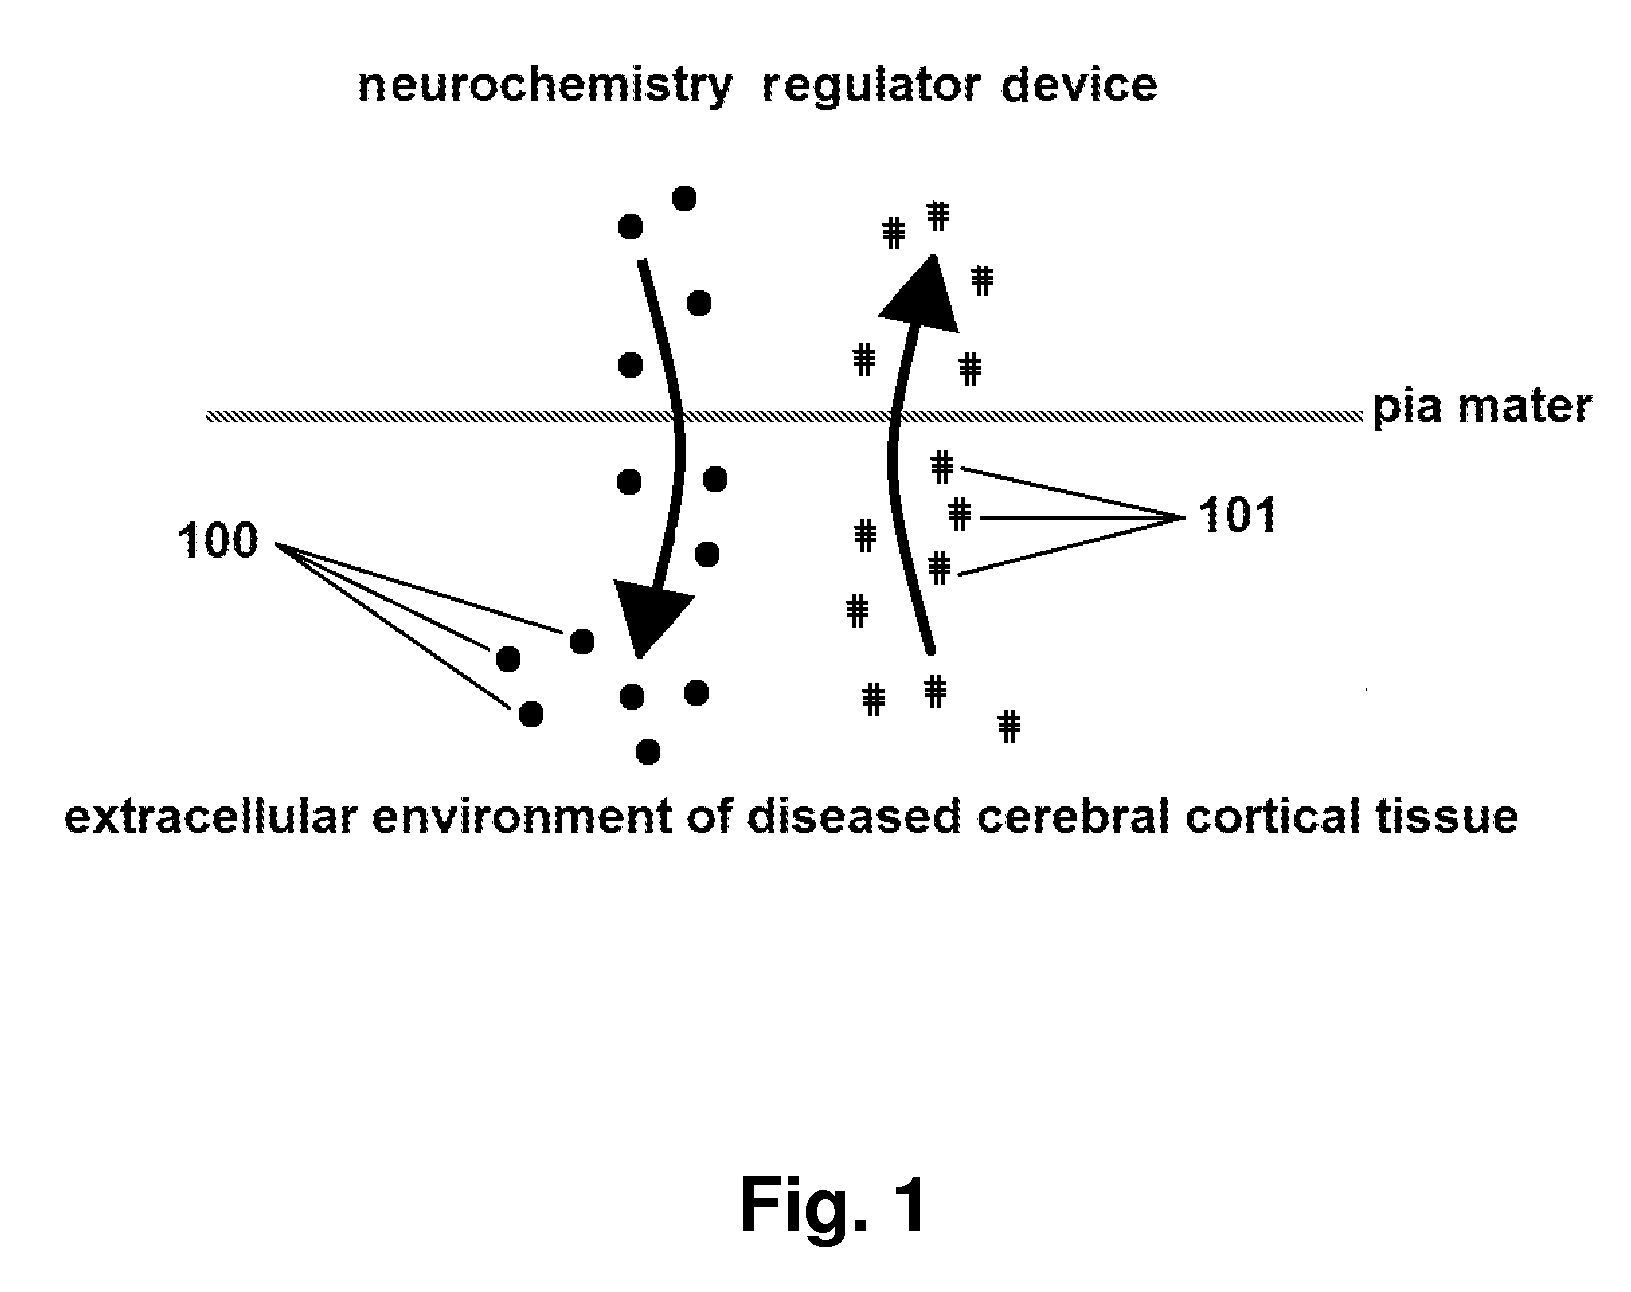 Apparatus and use of a neurochemisrty regulator device insertable in the cranium for the
treatment of cerebral cortical disorders